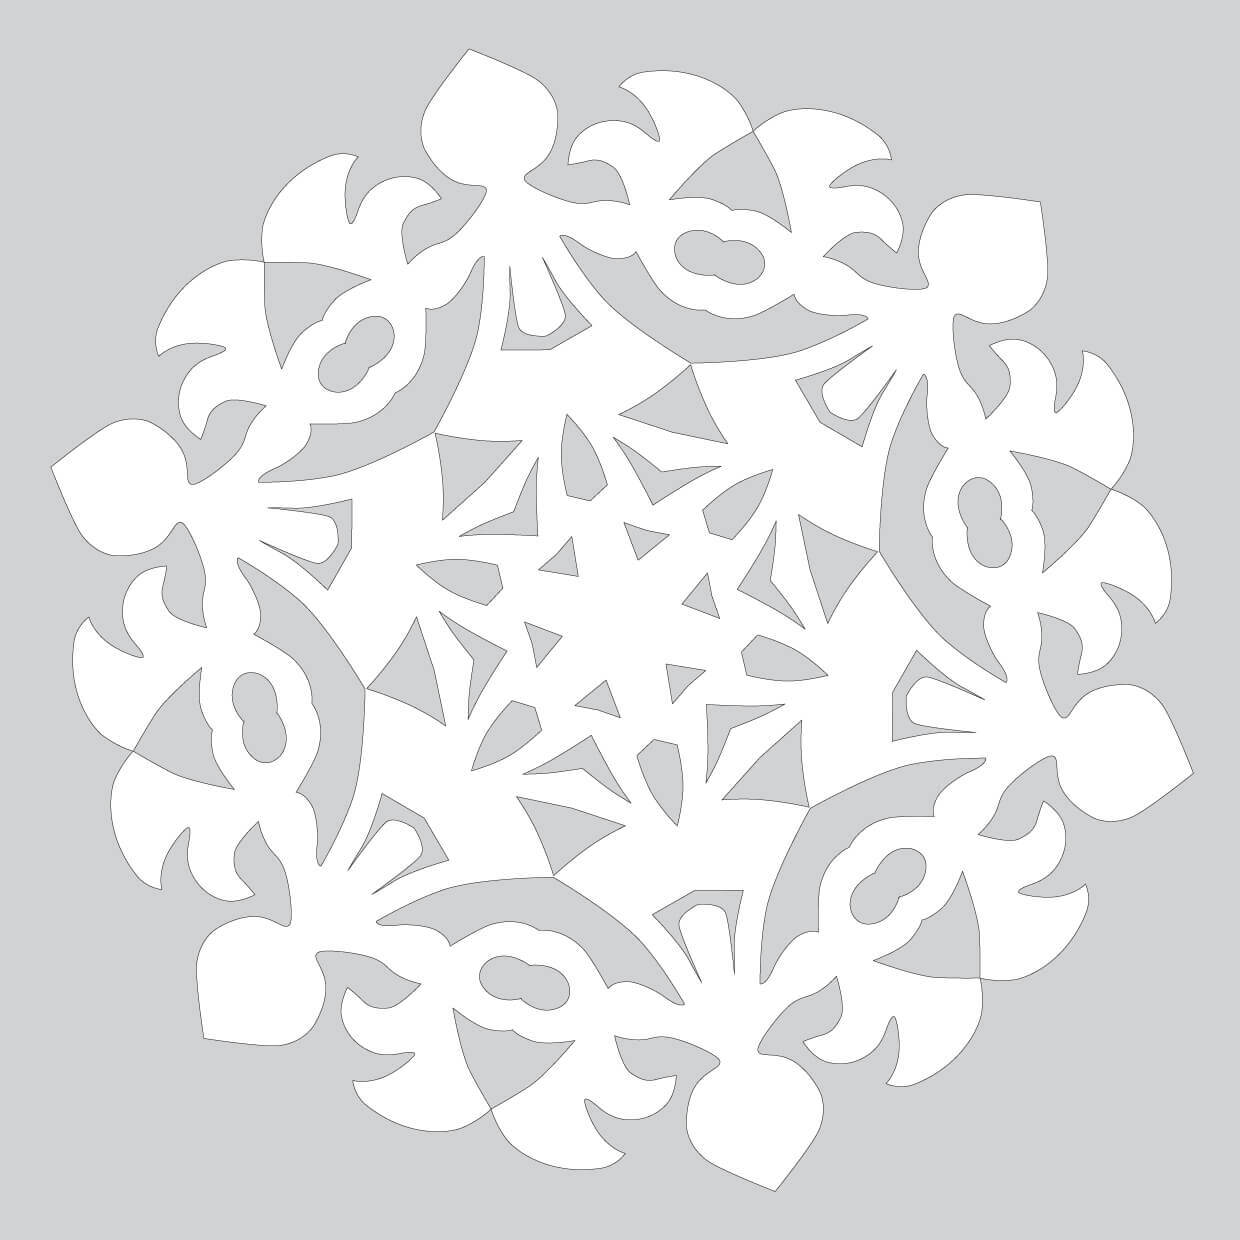 Blank Template To Draw A Pattern For Paper Snowflake | Free With Blank Snowflake Template